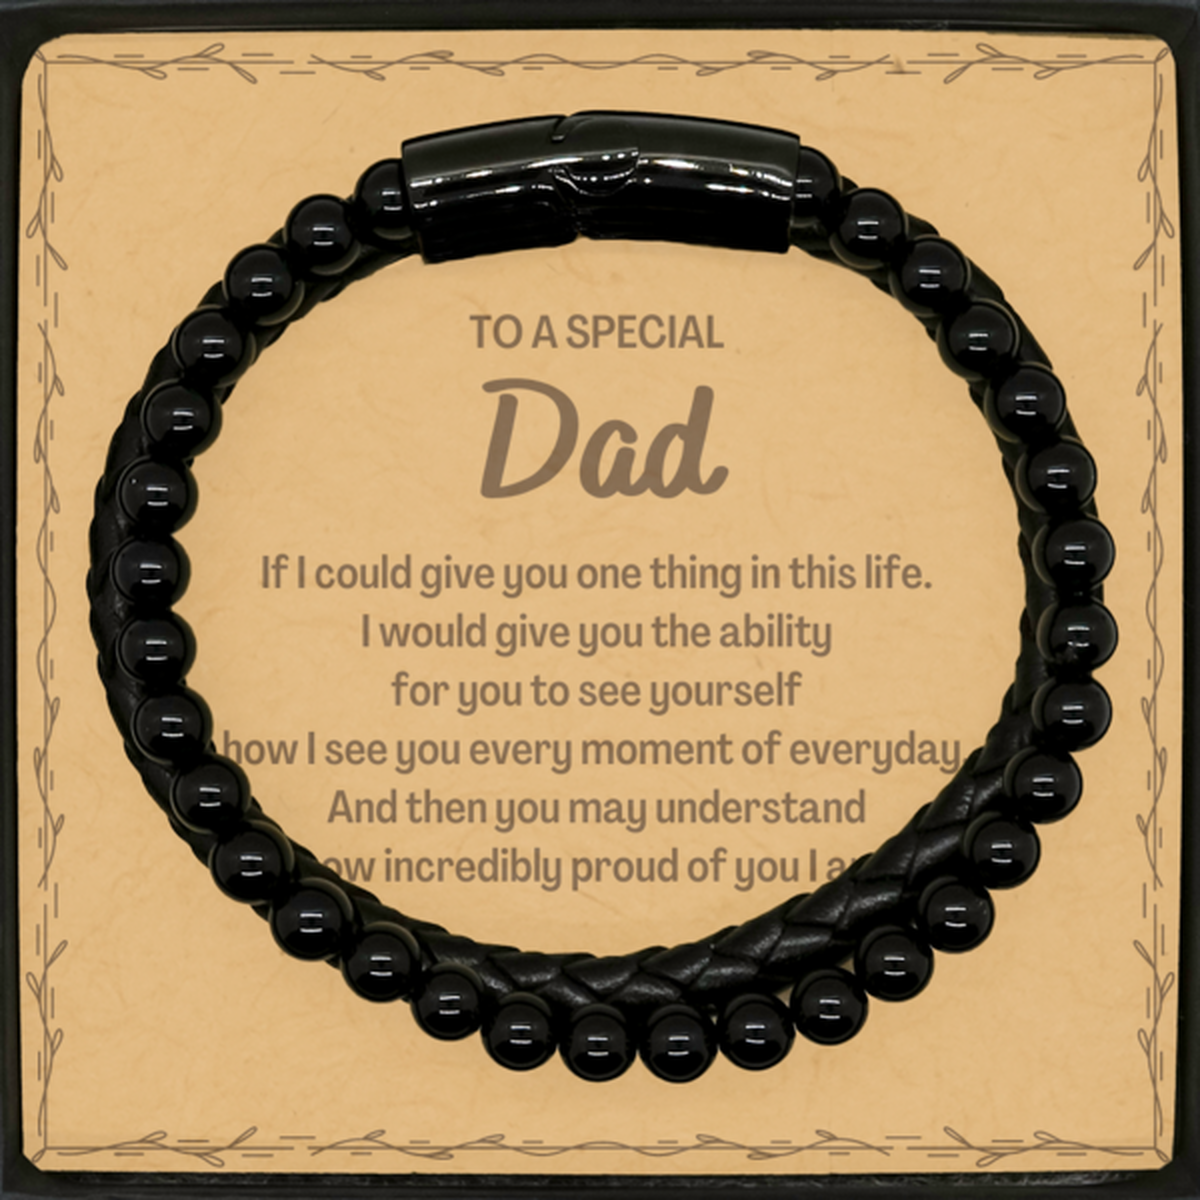 To My Dad Stone Leather Bracelets, Gifts For Dad Message Card, Inspirational Gifts for Christmas Birthday, Epic Gifts for Dad To A Special Dad how incredibly proud of you I am